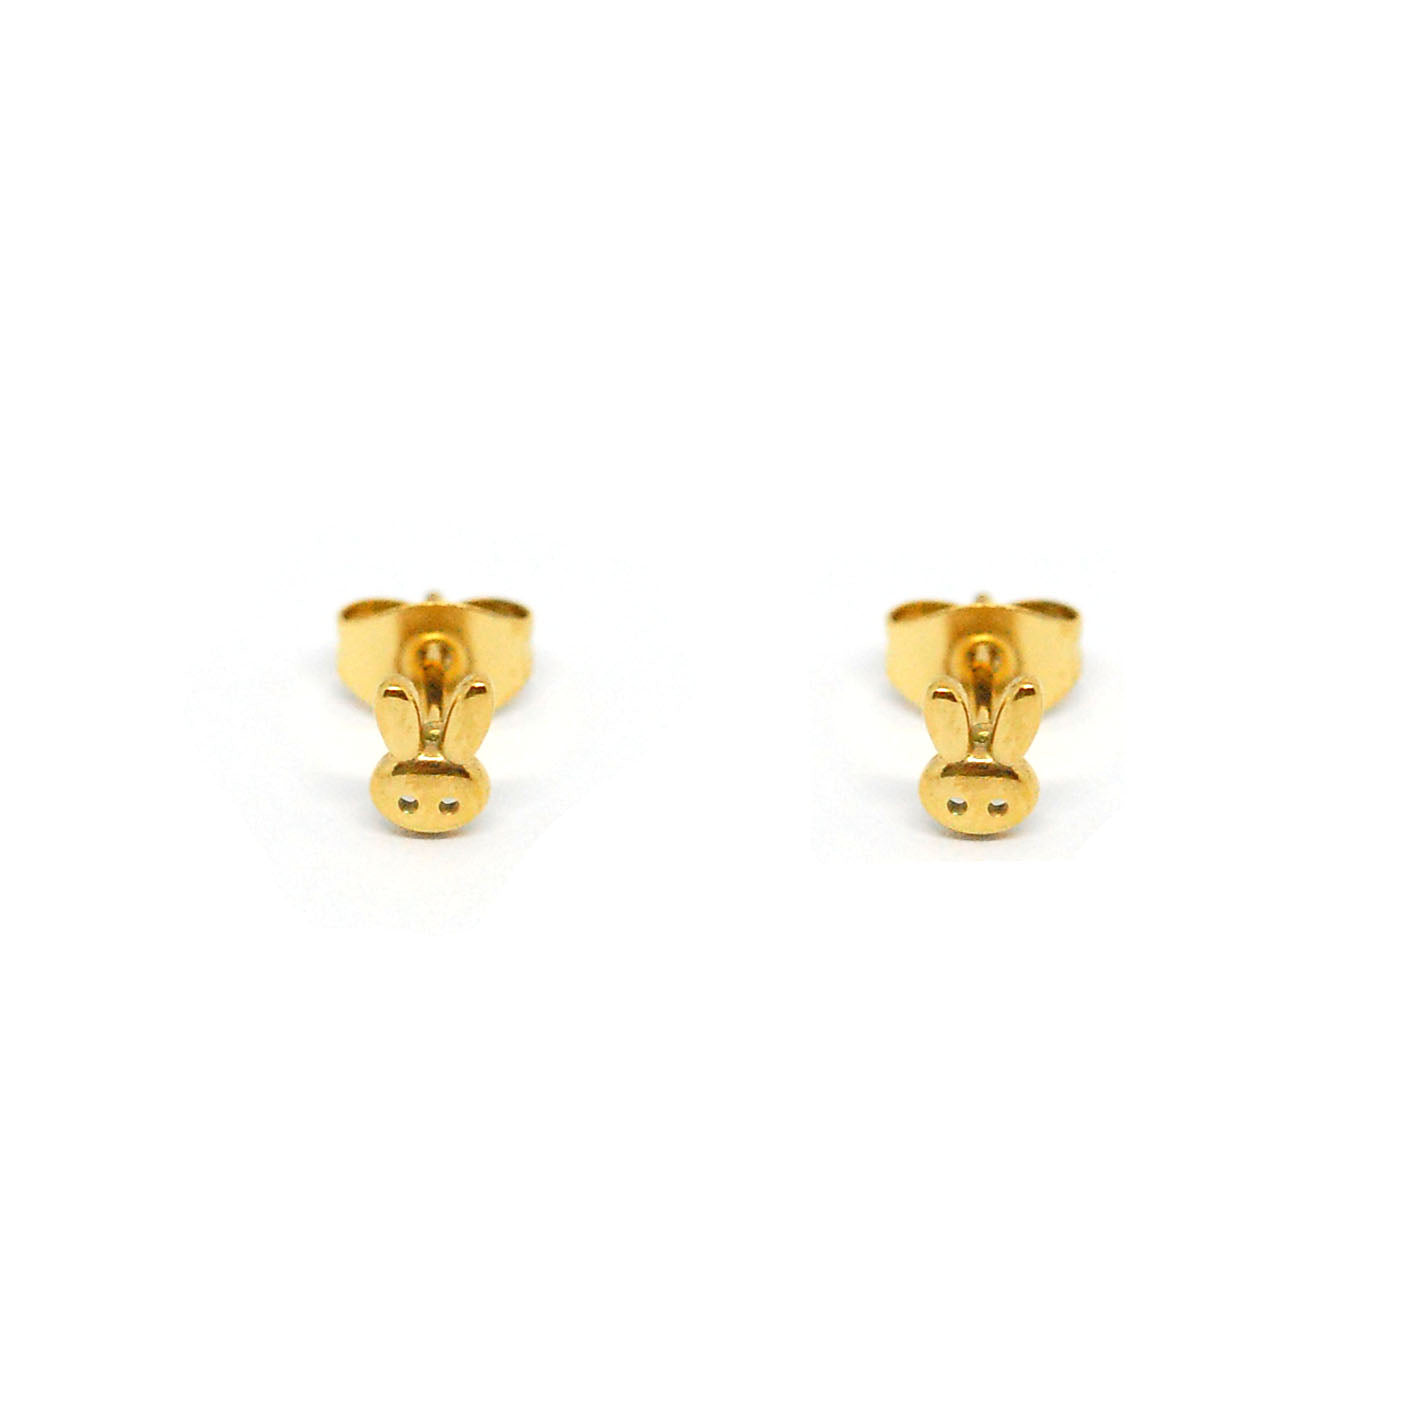 ESE 8149: All IPG Baby Bunny Studs